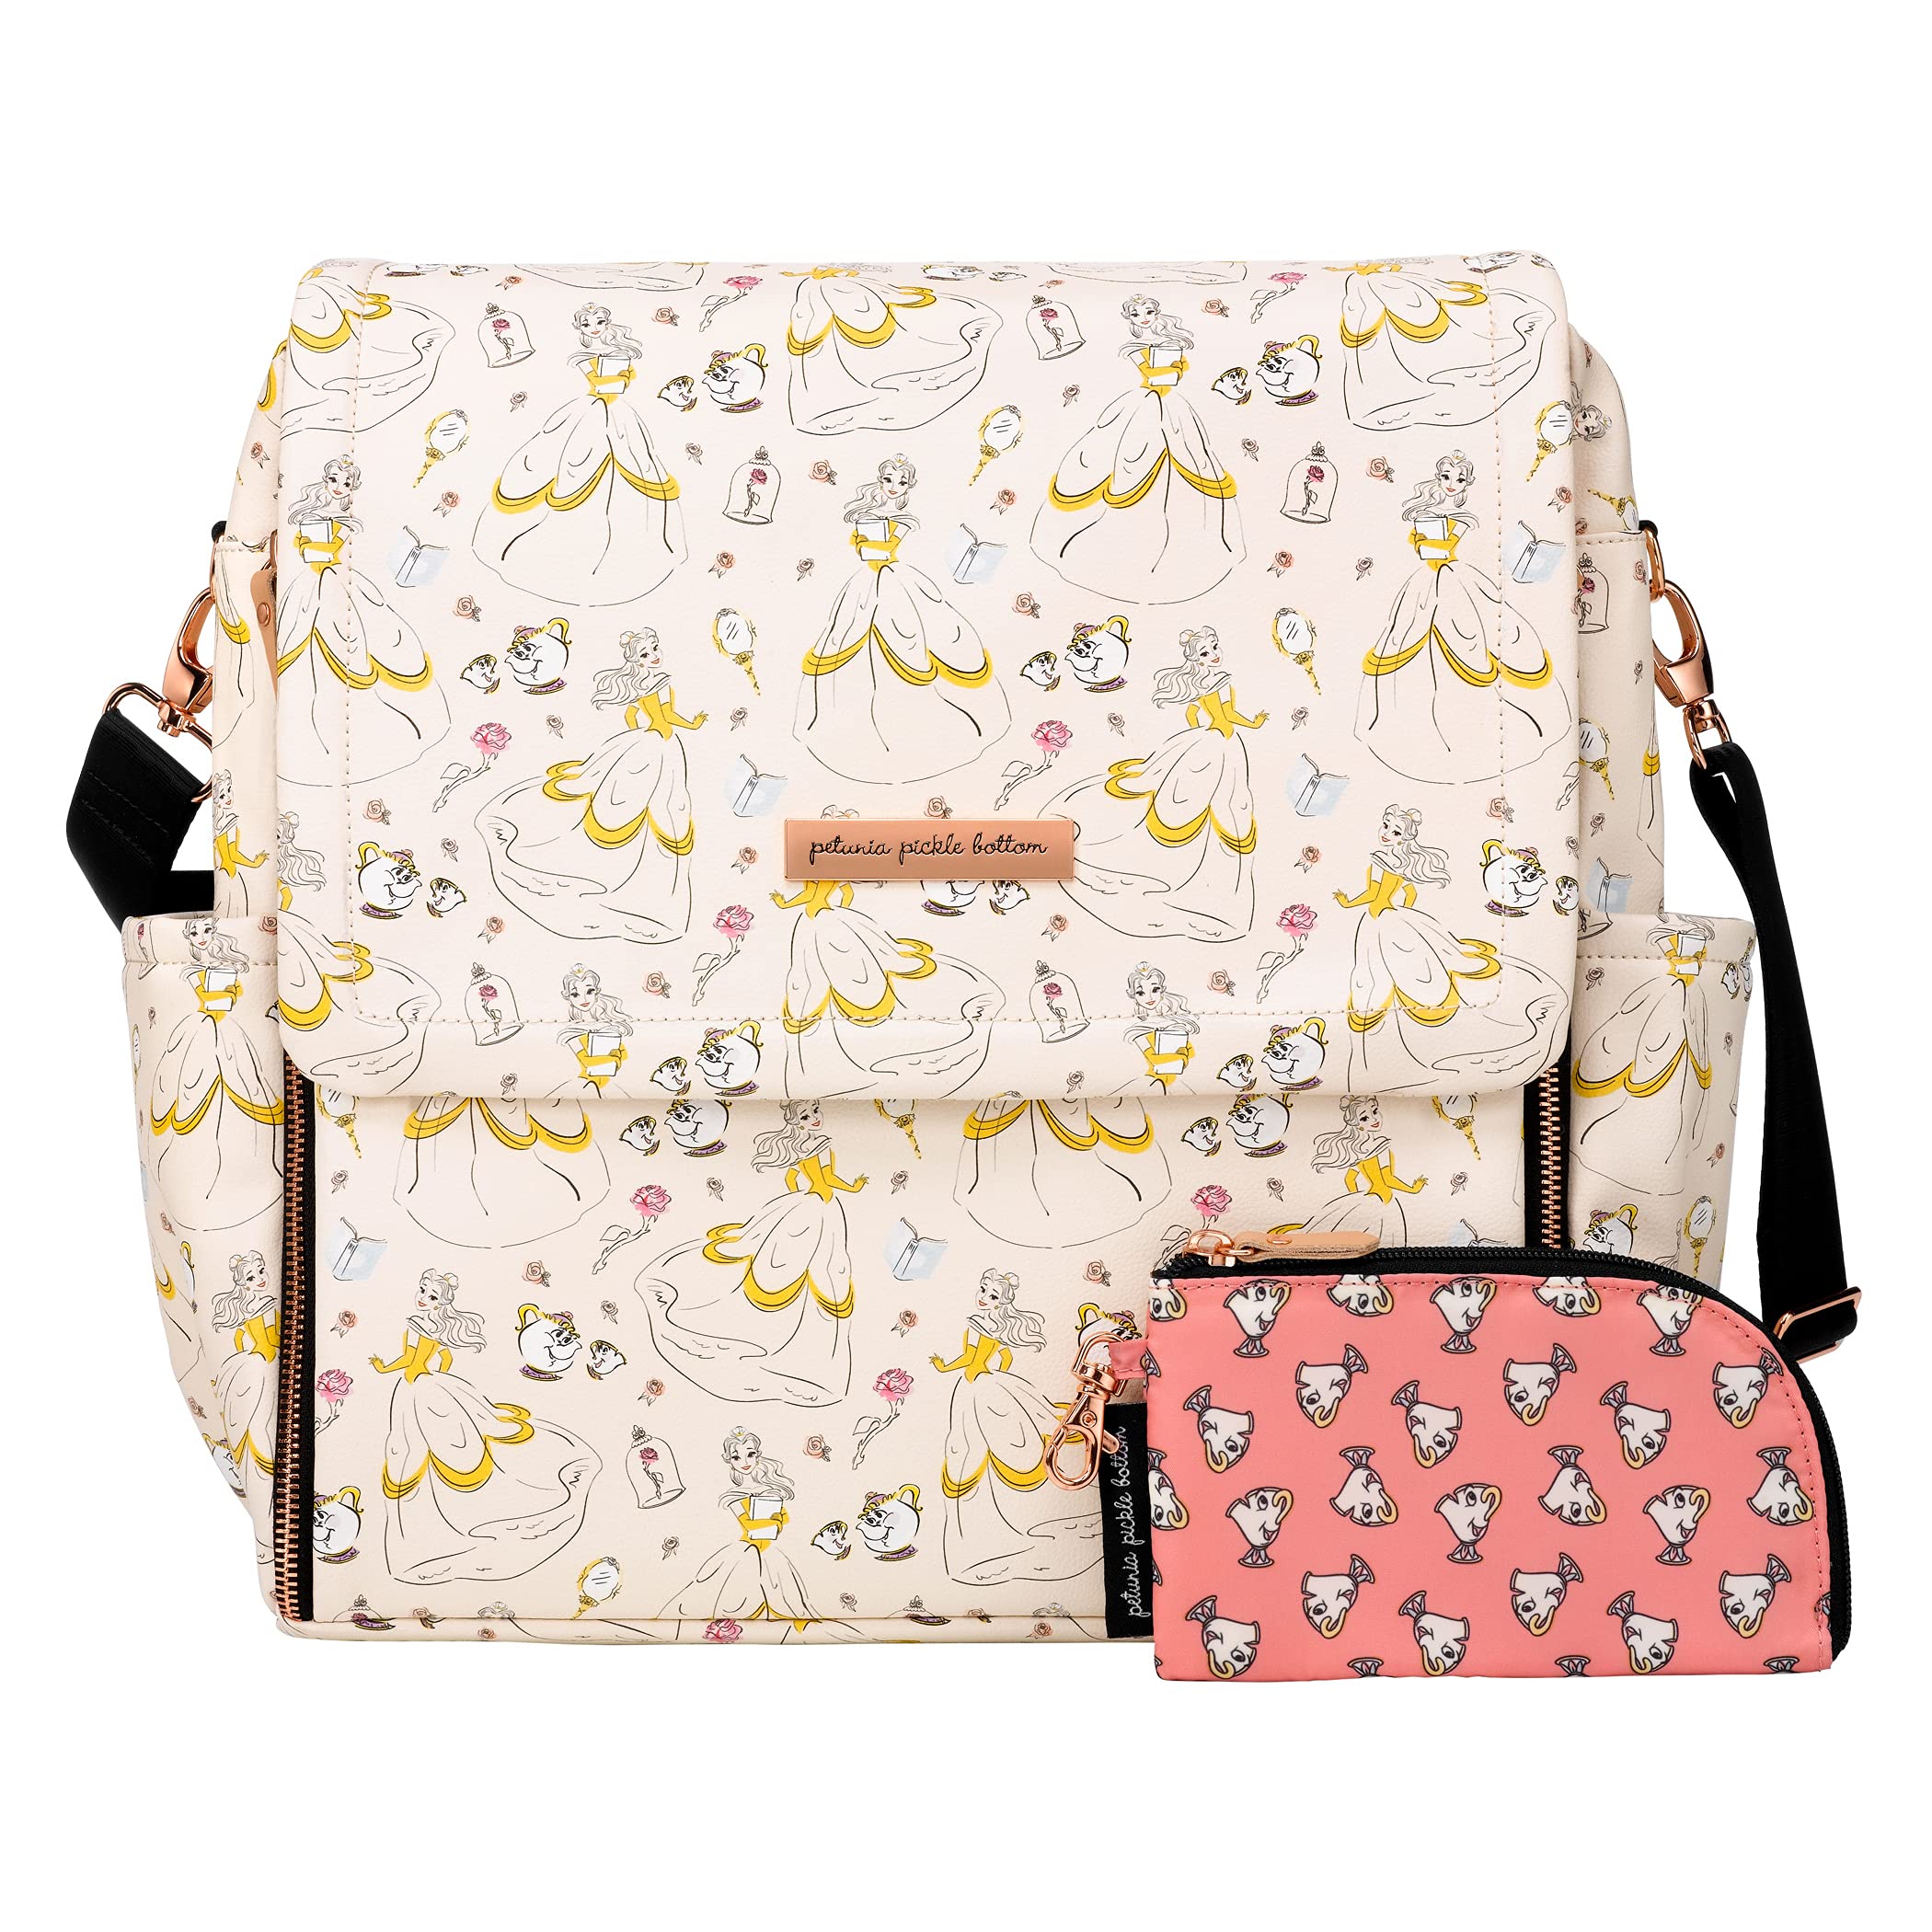 Petunia Pickle Bottom Boxy Backpack Diaper Bag for Parents | Top-Selling Stylish Baby Bag | Sophisticated & Spacious Backpack for On The Go Moms | Disney's Beauty & The Beast - Whimsical Belle